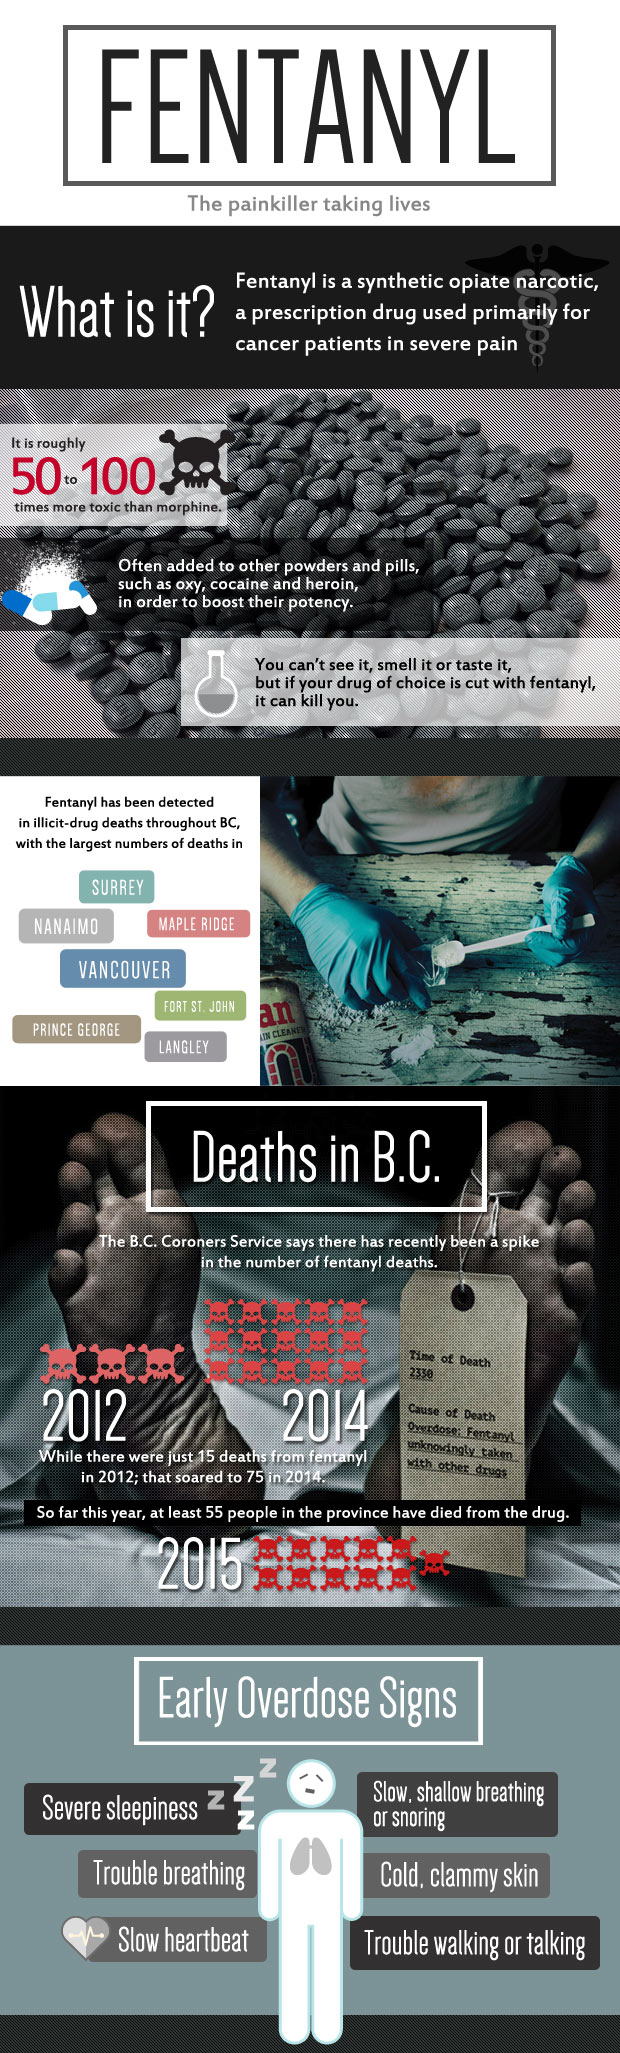 Infographic: Fentanyl, the painkiller taking lives